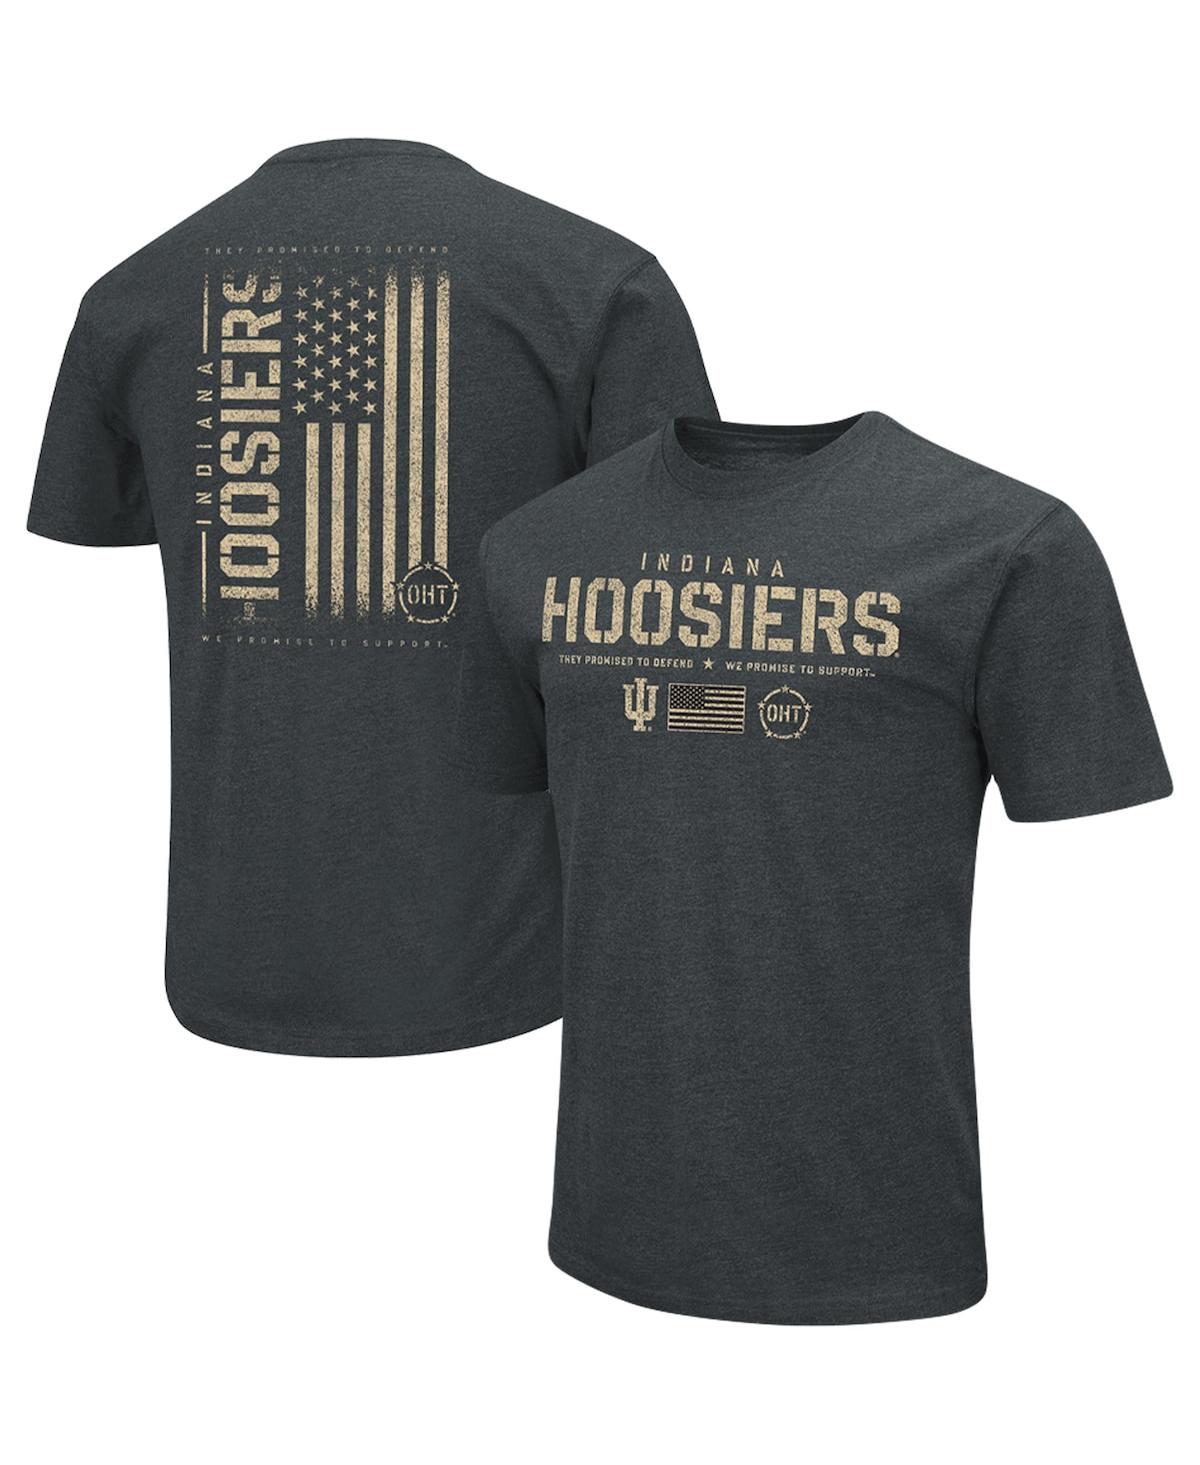 Men's Colosseum Heathered Black Indiana Hoosiers Oht Military-Inspired Appreciation Flag 2.0 T-shirt - Heathered Black